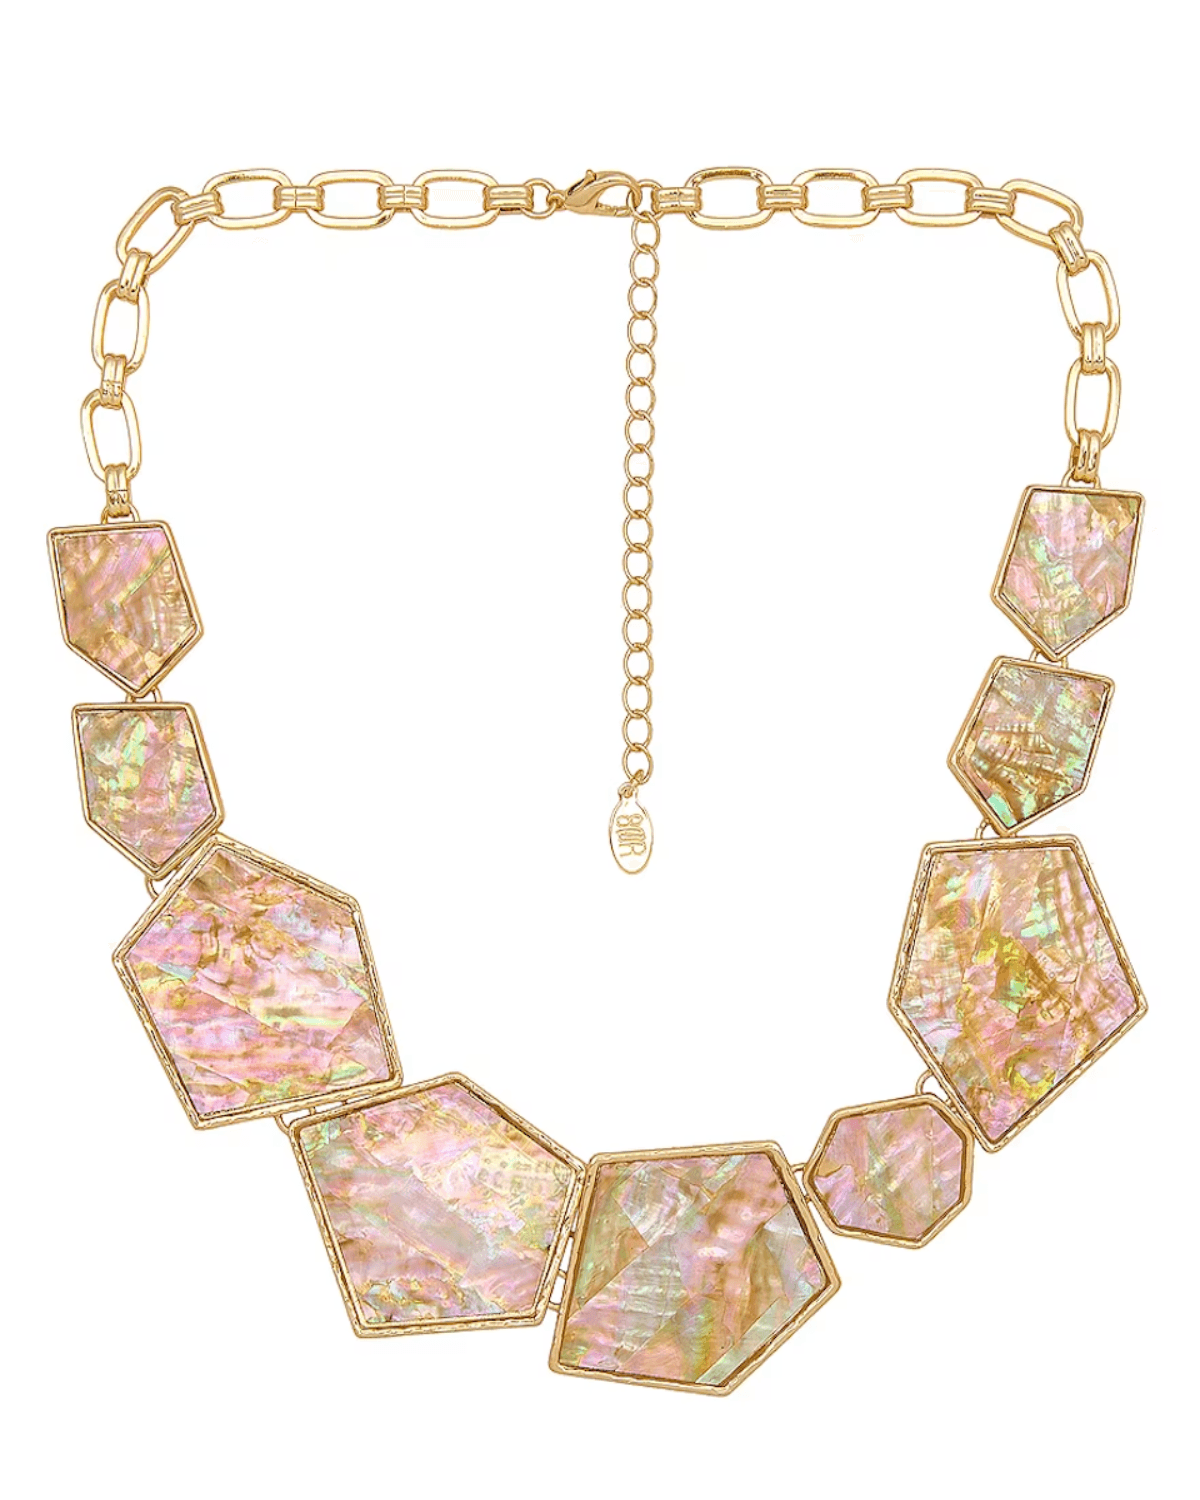 STATEMENT NECKLACE IN MOTHER OF PEARL - 8 Other Reasons